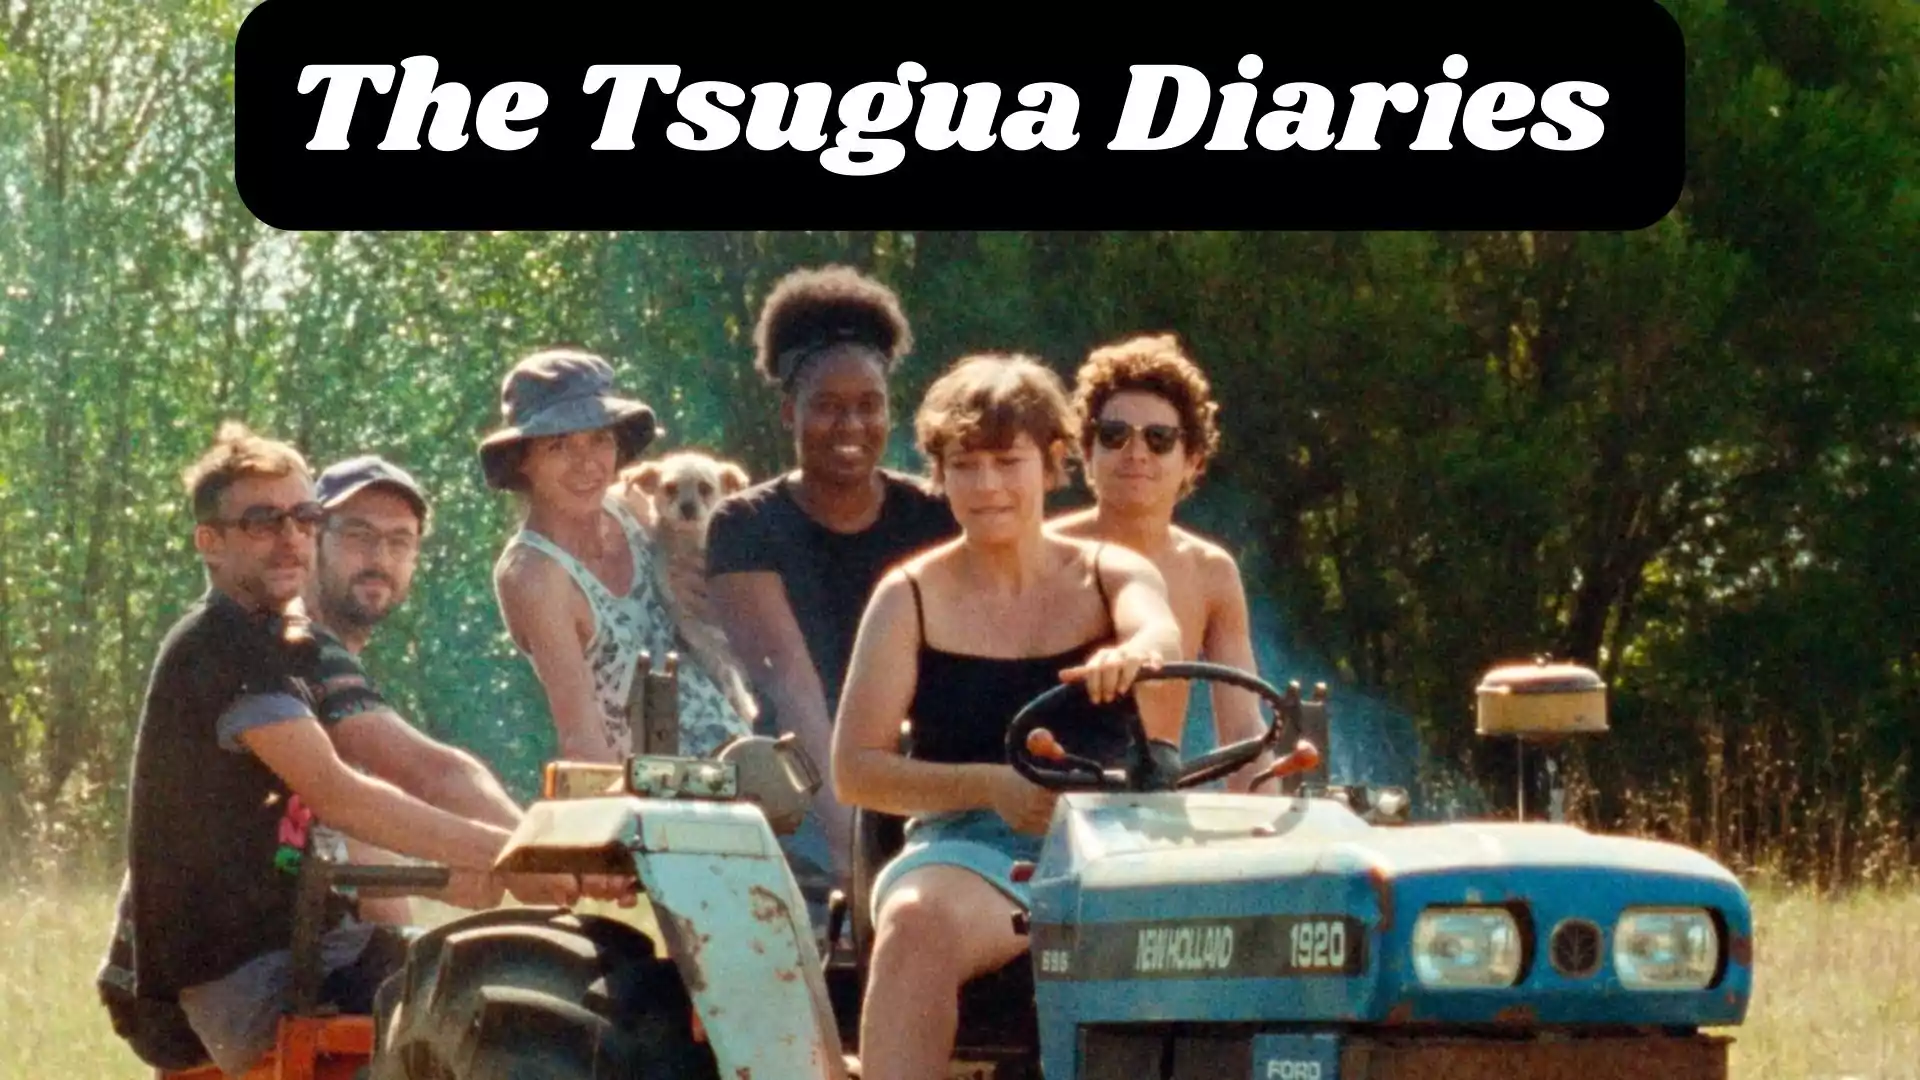 The Tsugua Diaries Parents Guide and Age Rating | 2021